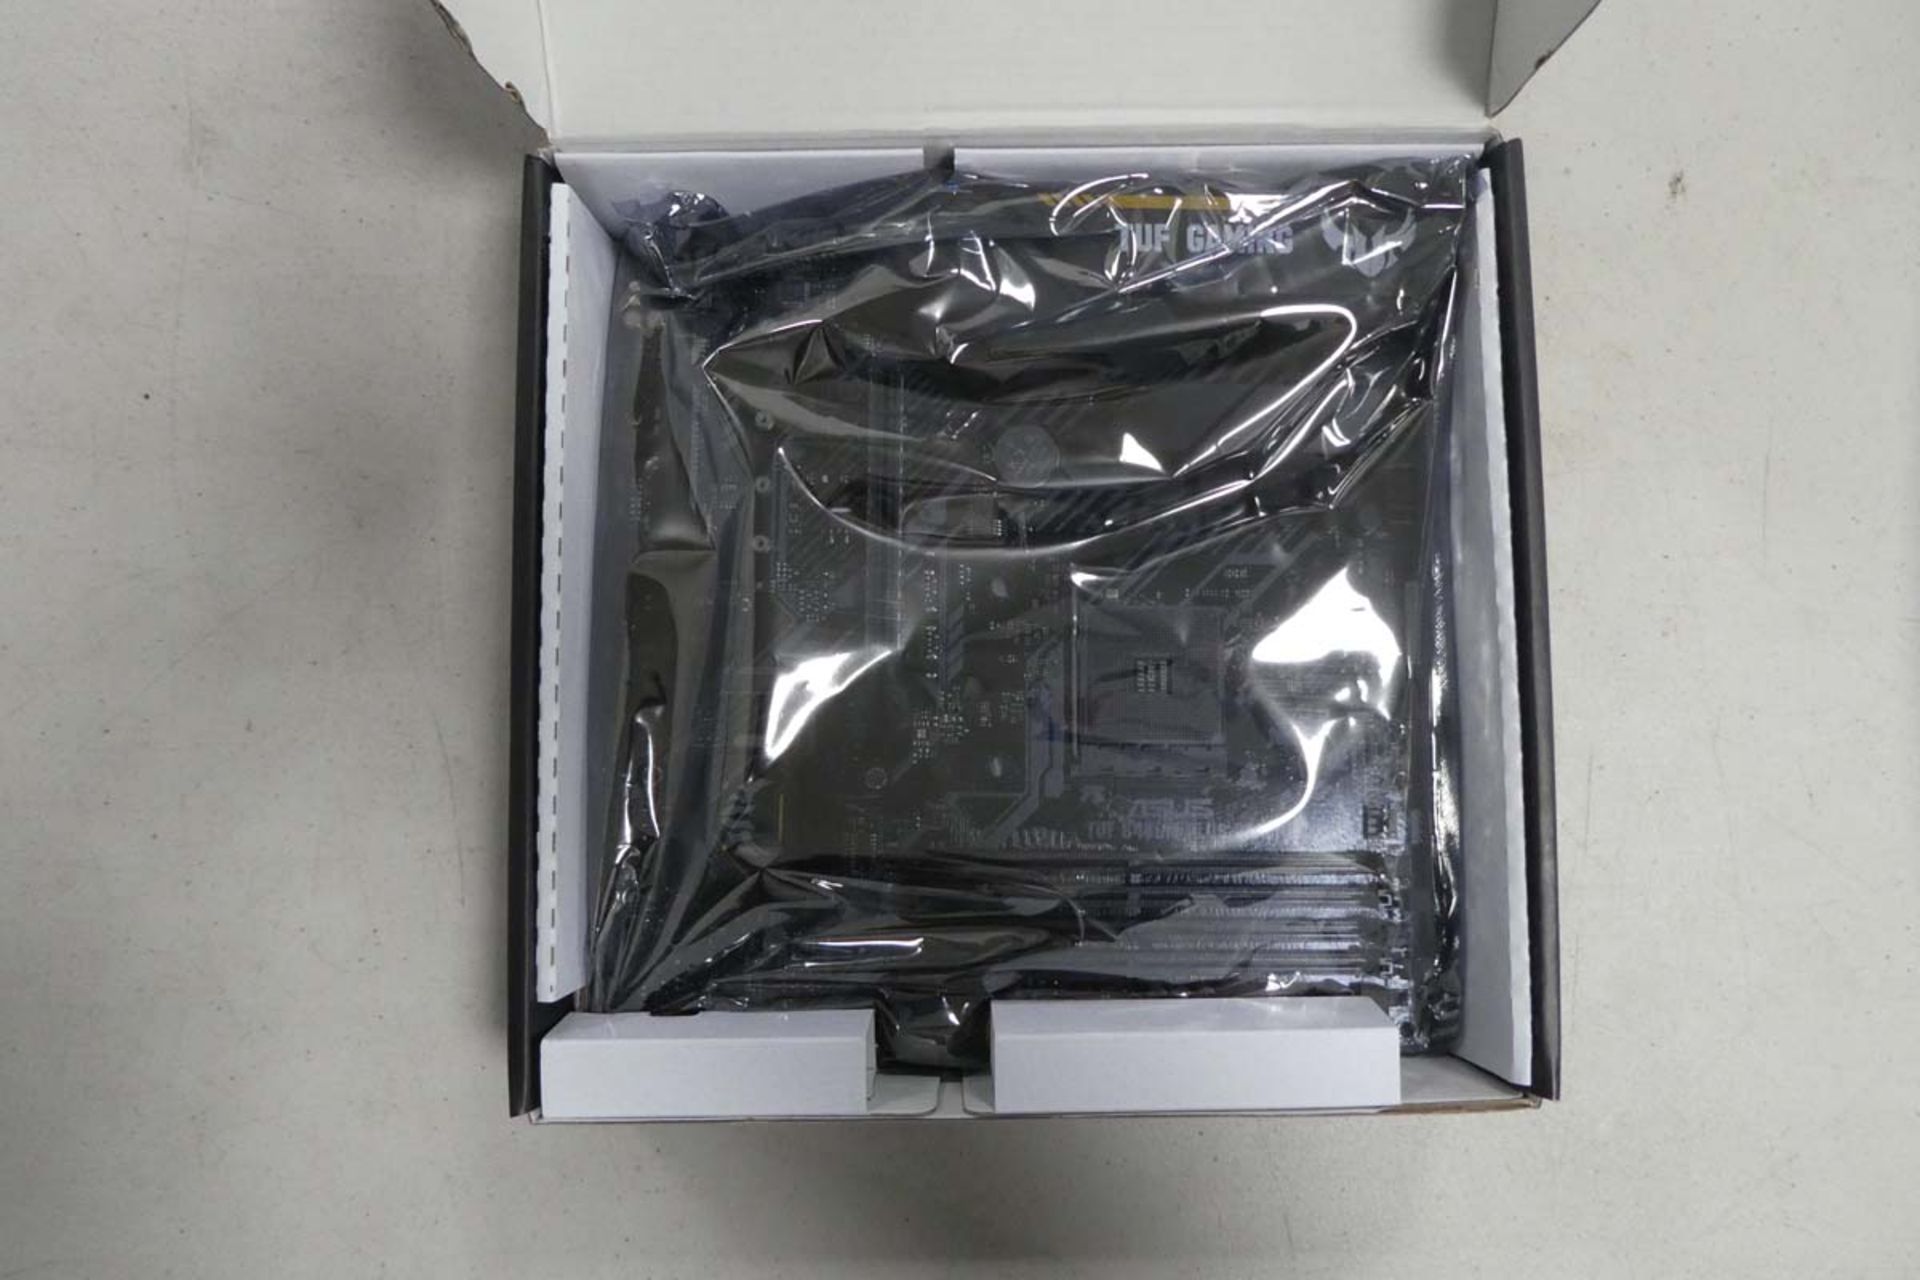 Asus TUFB450M motherboard in box - Image 2 of 2